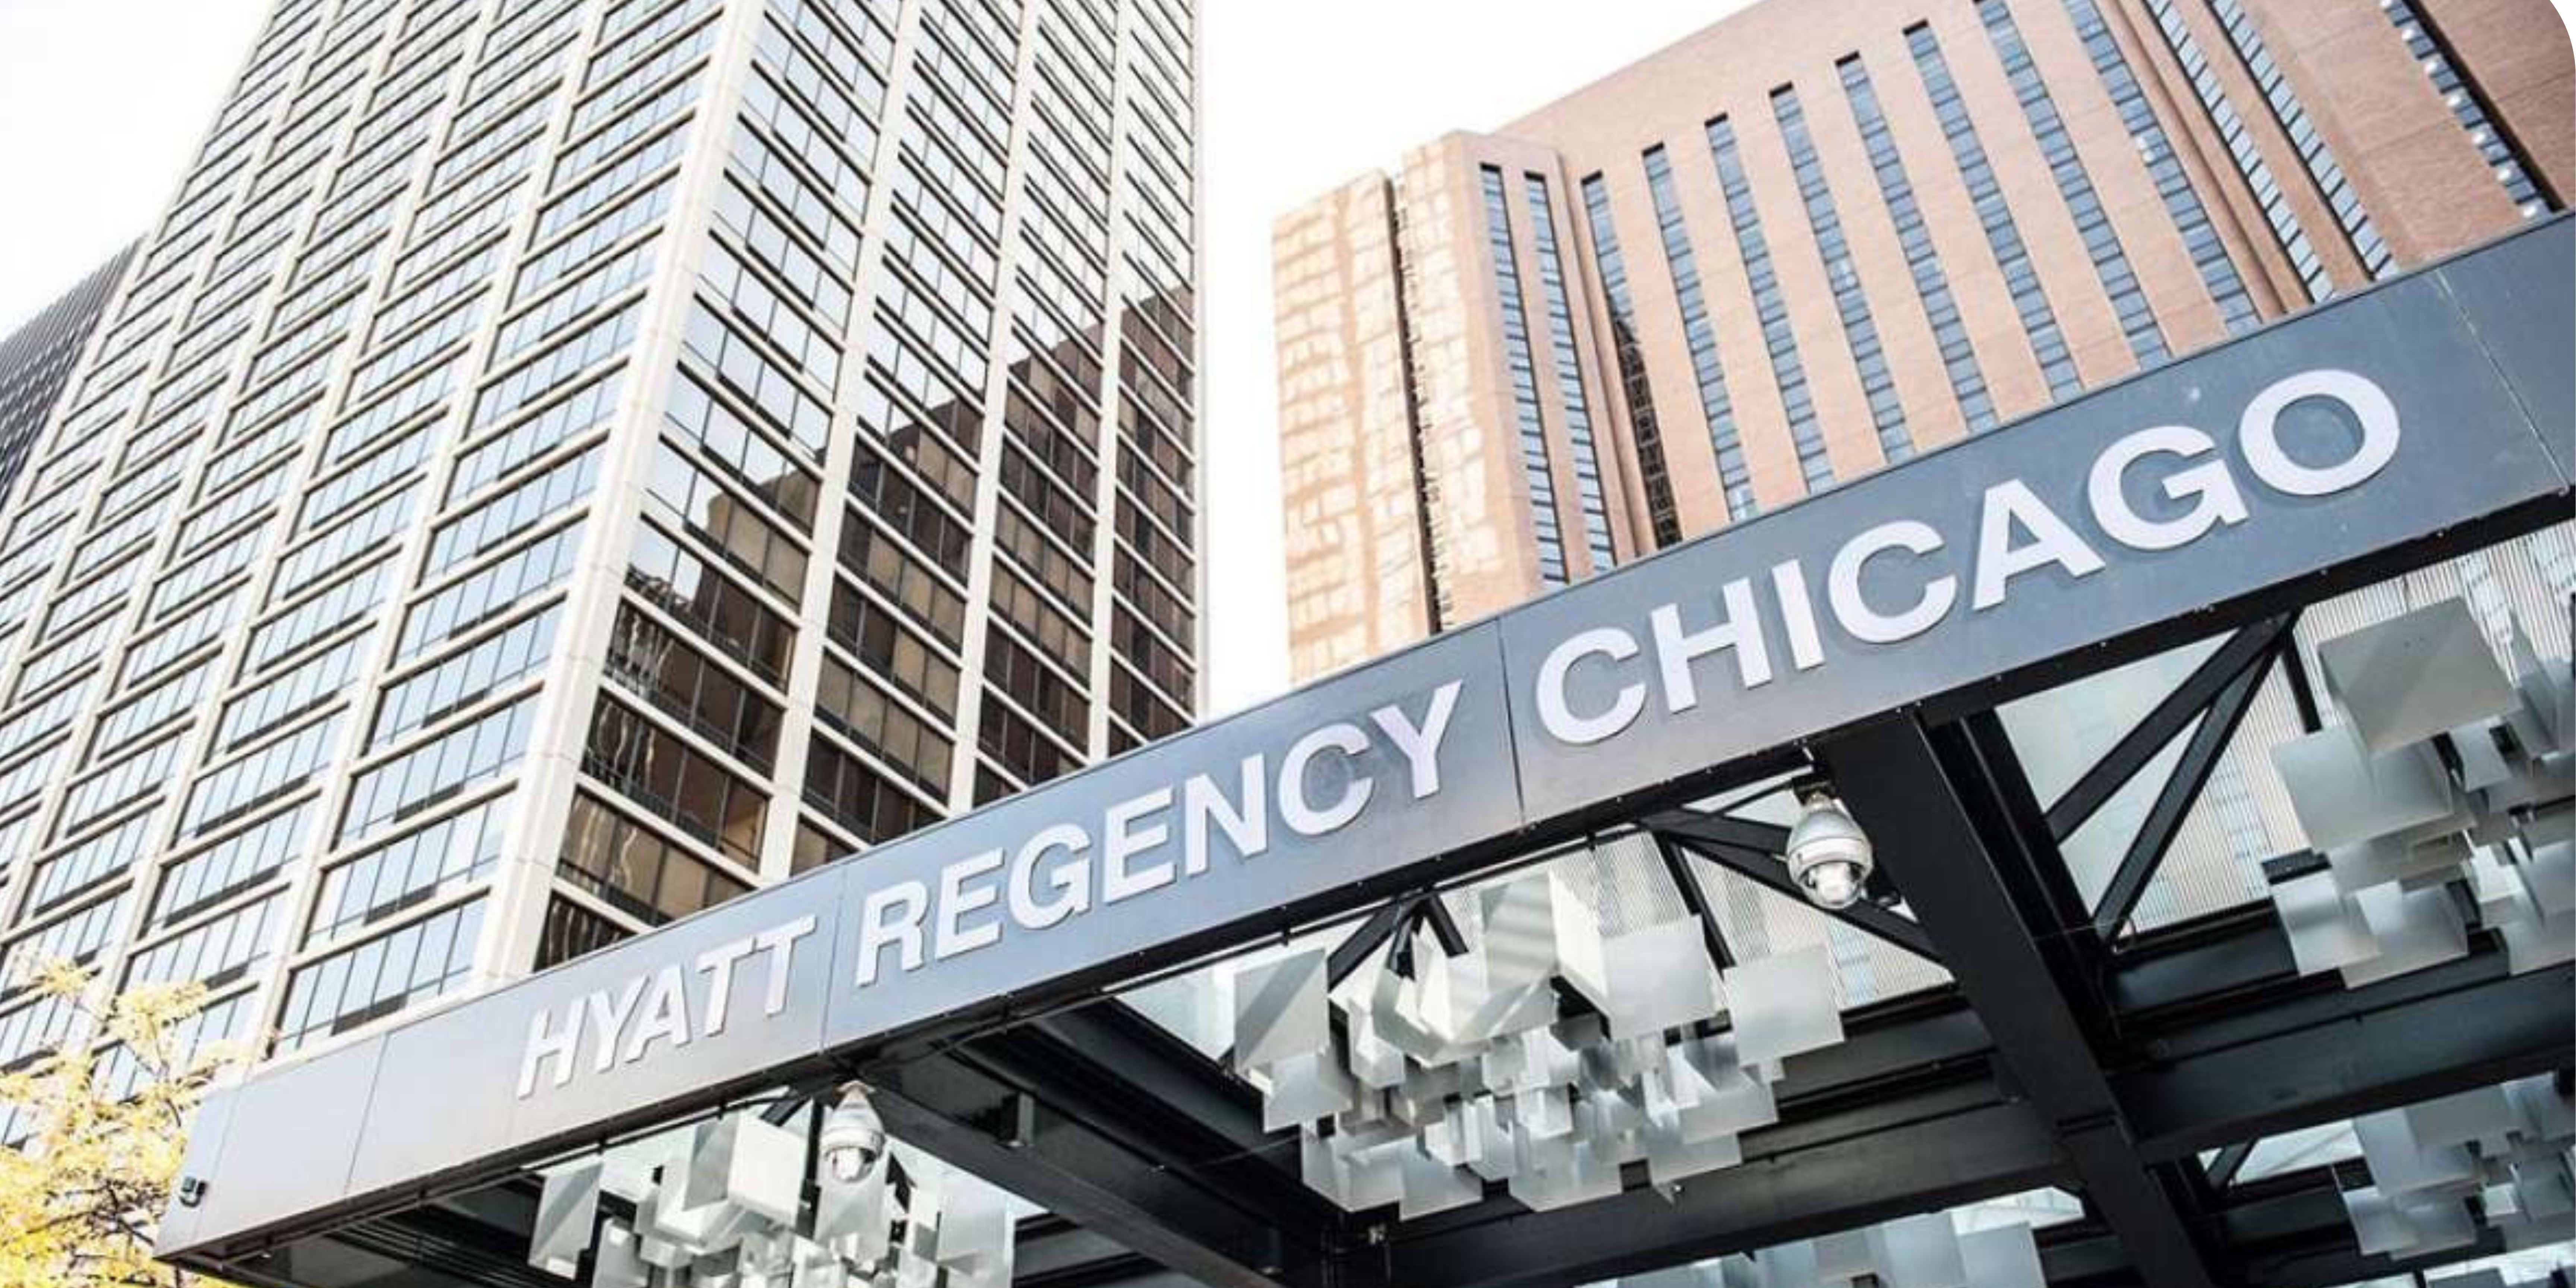 clickable image for conference hotel and location, hyatt regency chicago